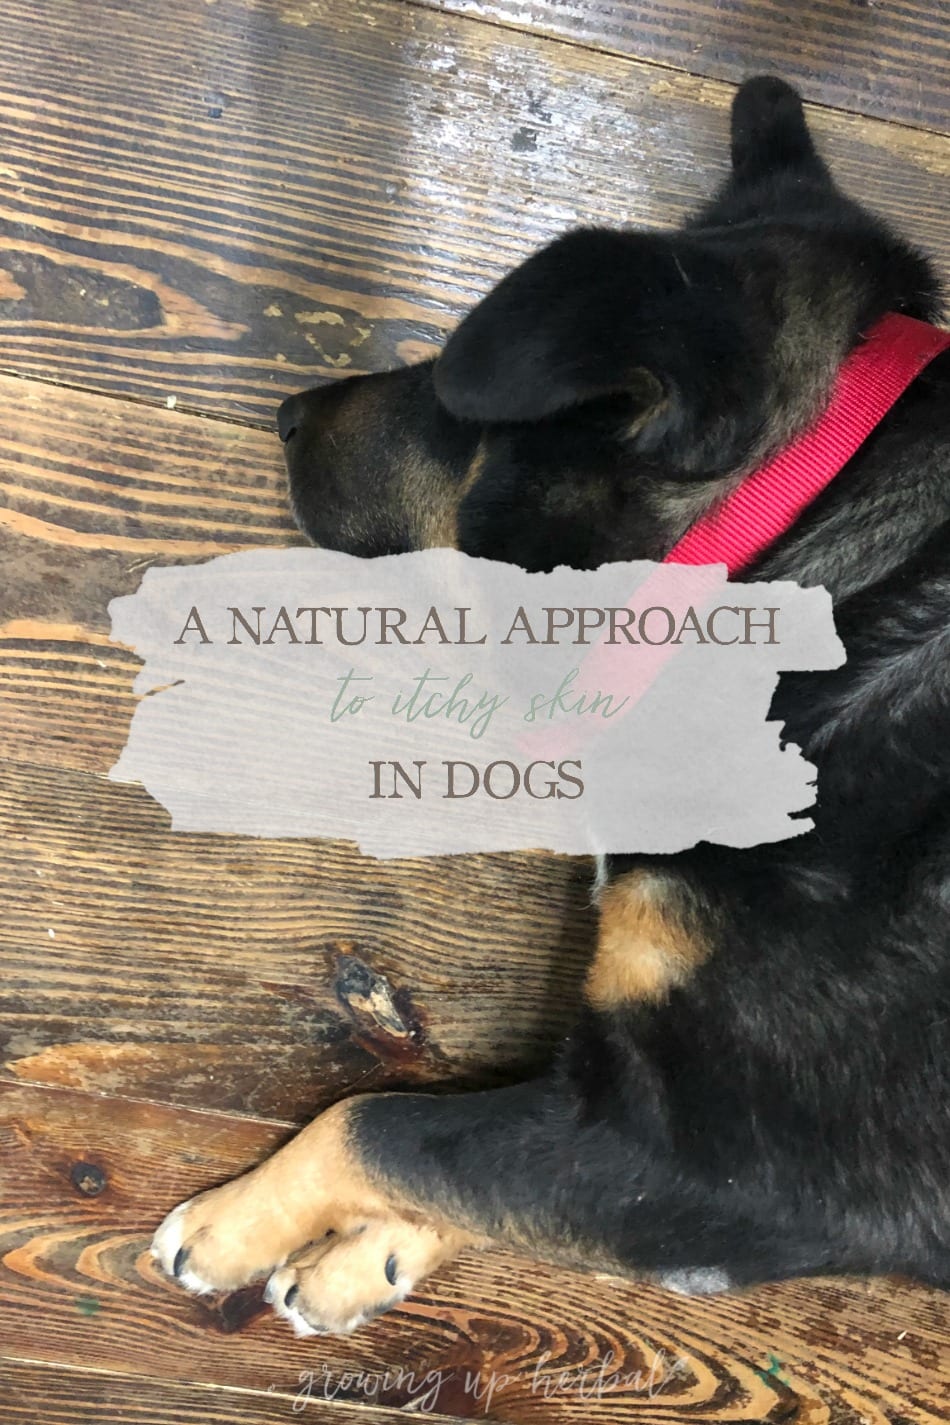 A Natural Approach to Itchy Skin in Dogs | Growing Up Herbal | How to use herbs and essential oils for support in dogs with itchy skin.